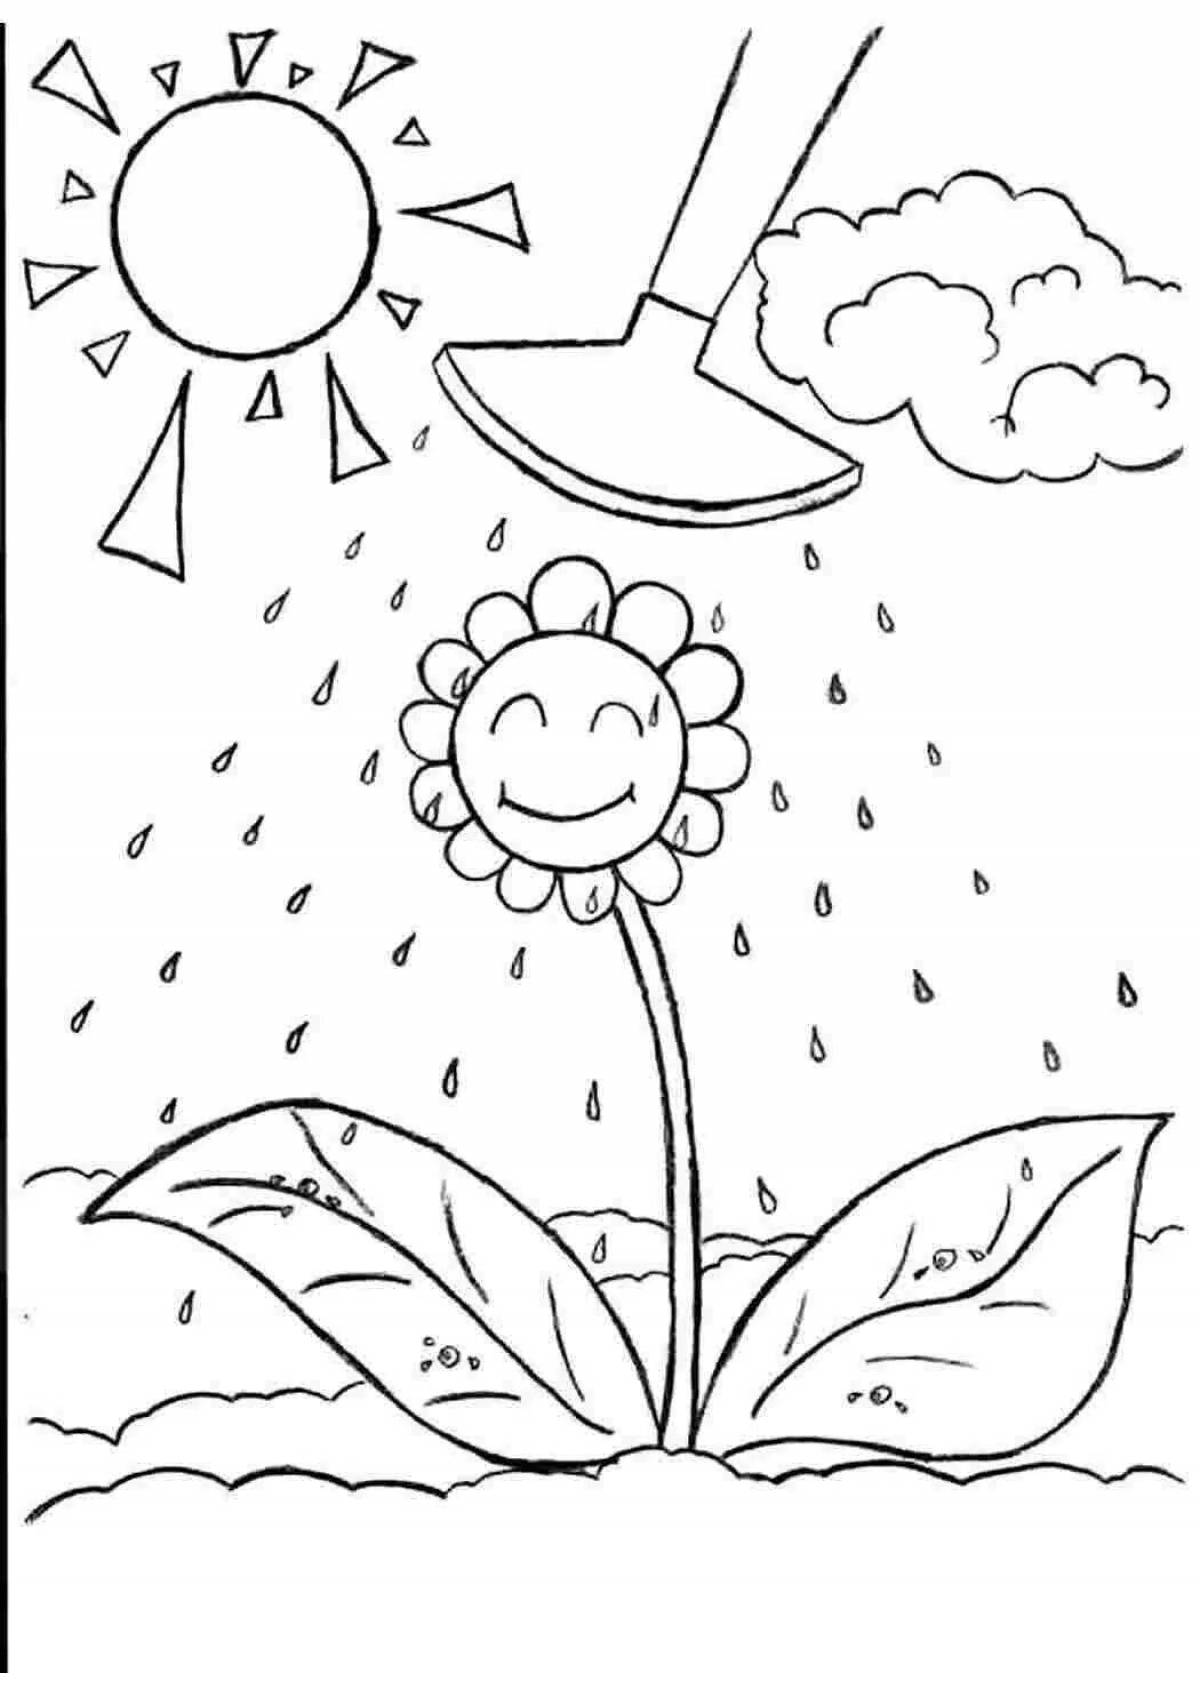 Fun ecology coloring book for preschoolers